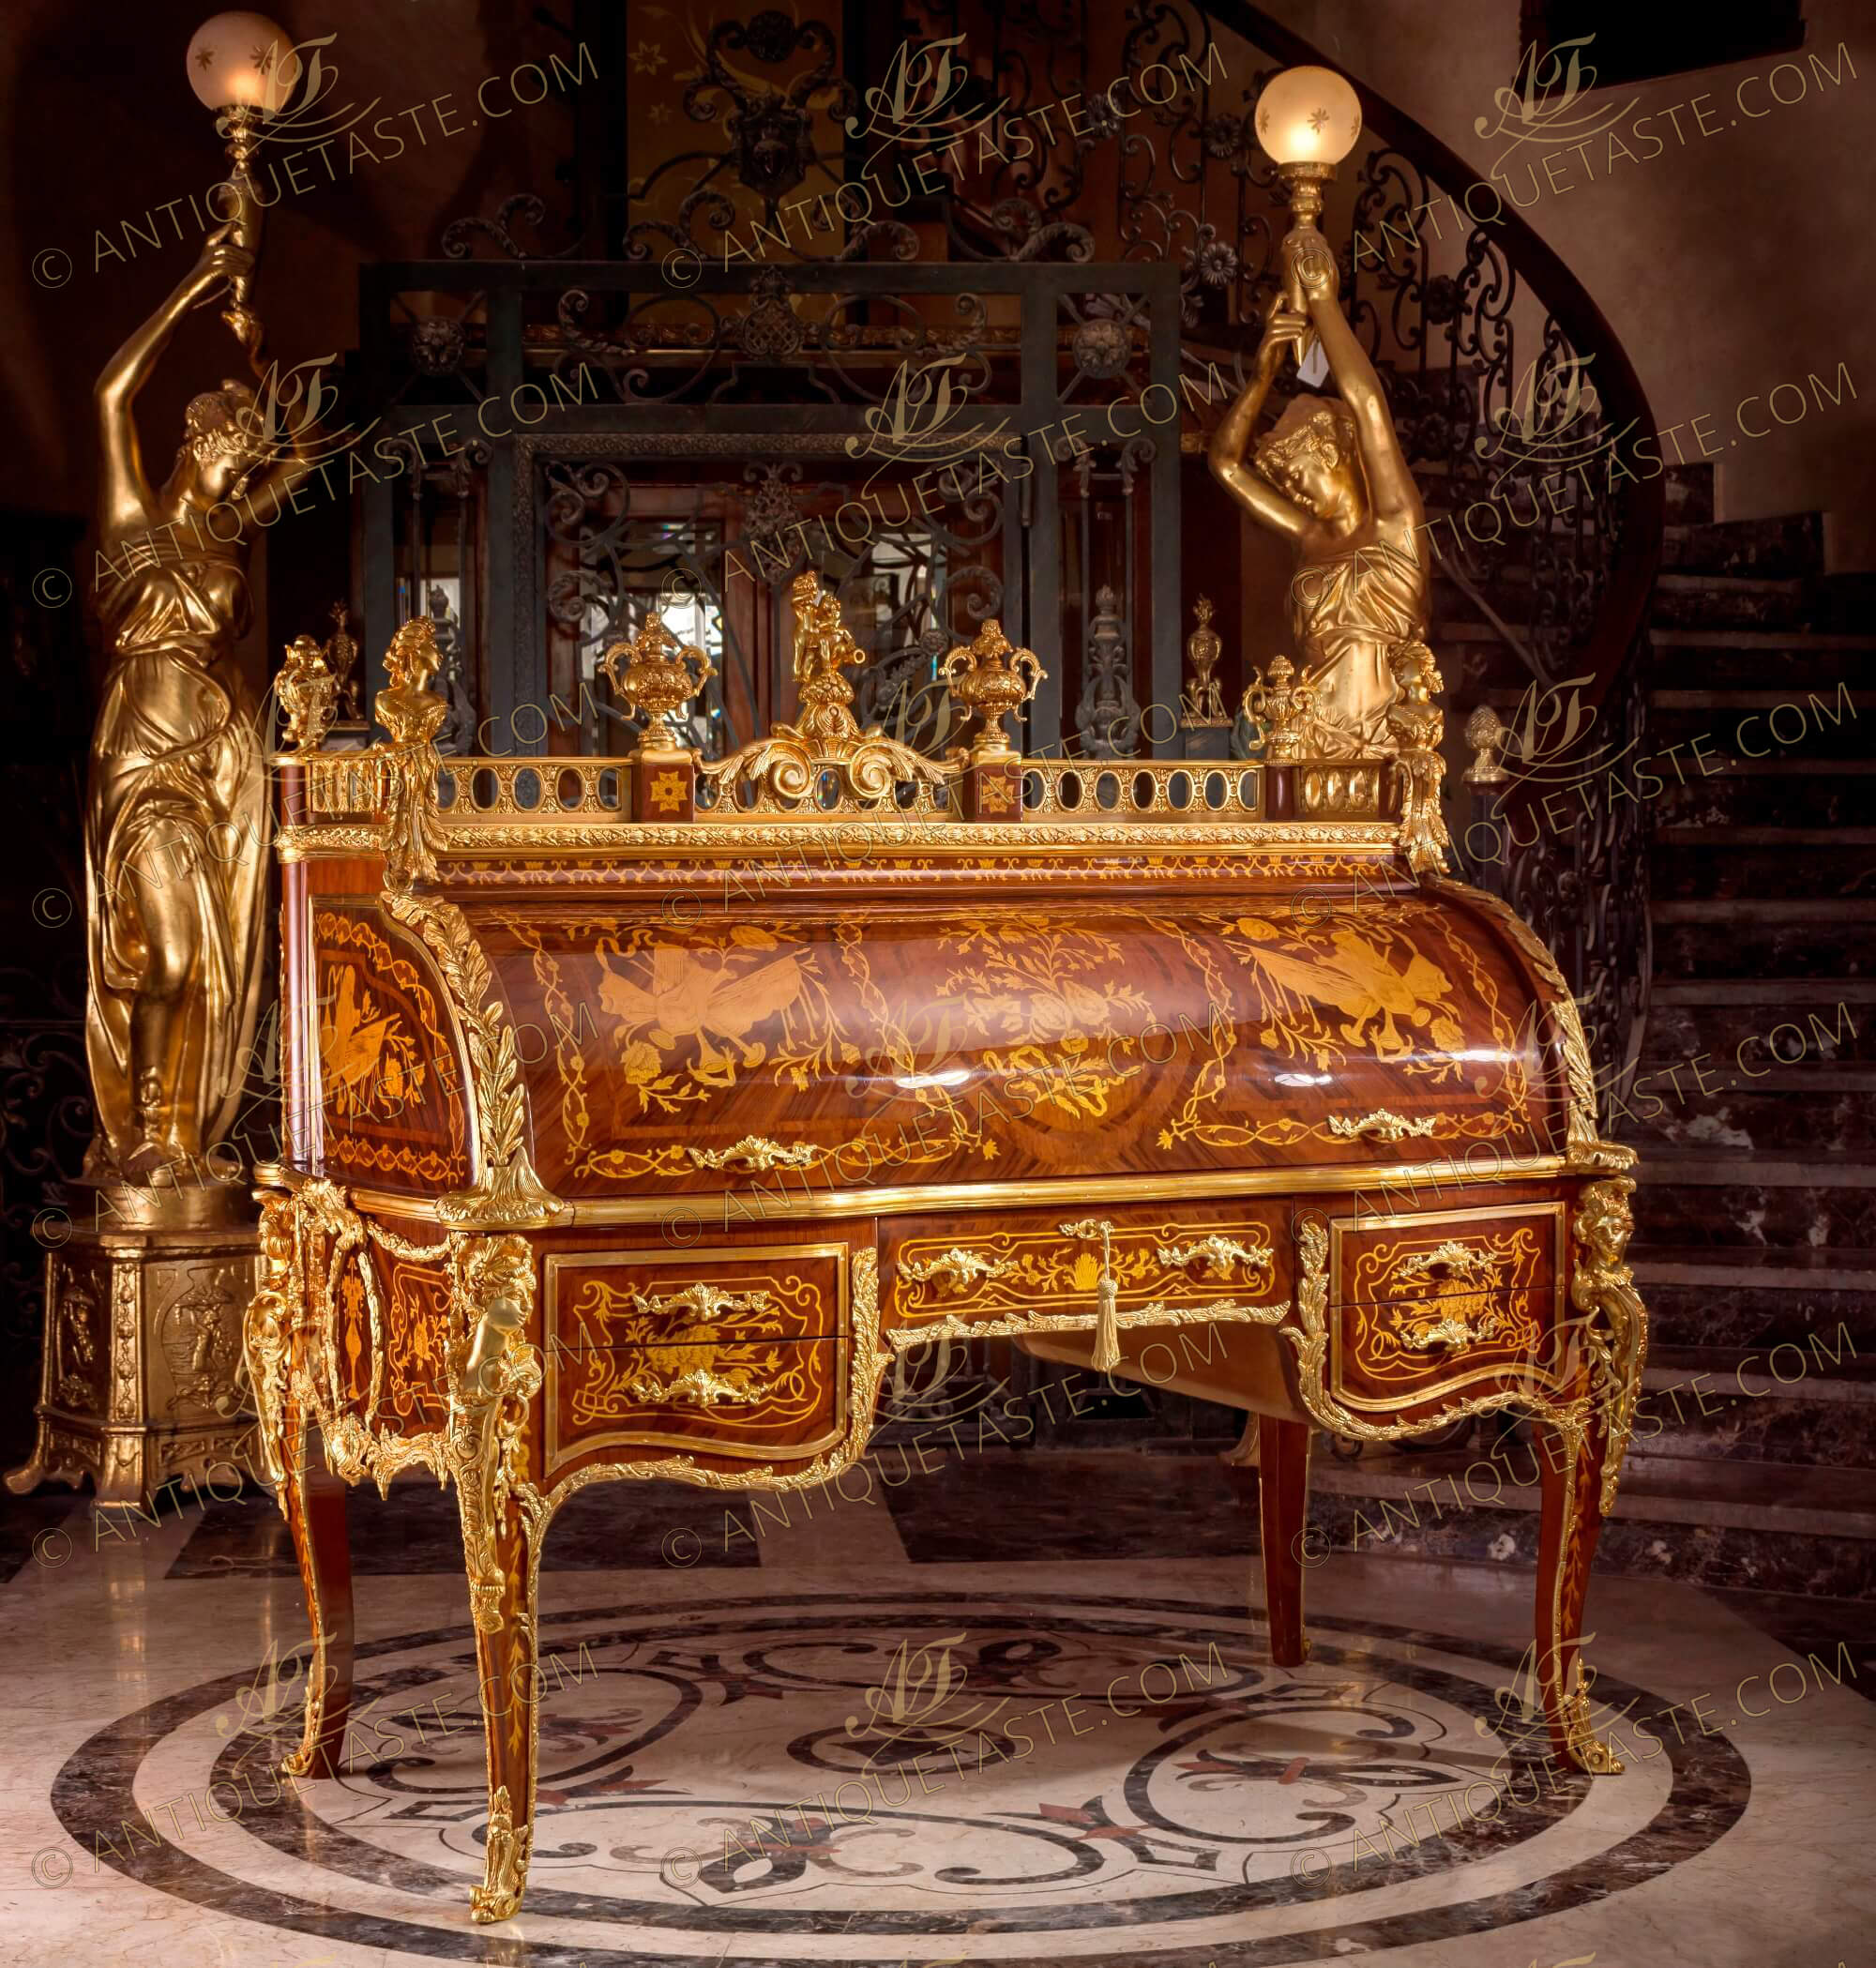 Bureau Du Roi (Secrétaire Cylindre de Louis XV), The King Desk, the most celebrated piece of 18th century French furniture after the model by Jean-François Oeben and Jean-Henri Riesener